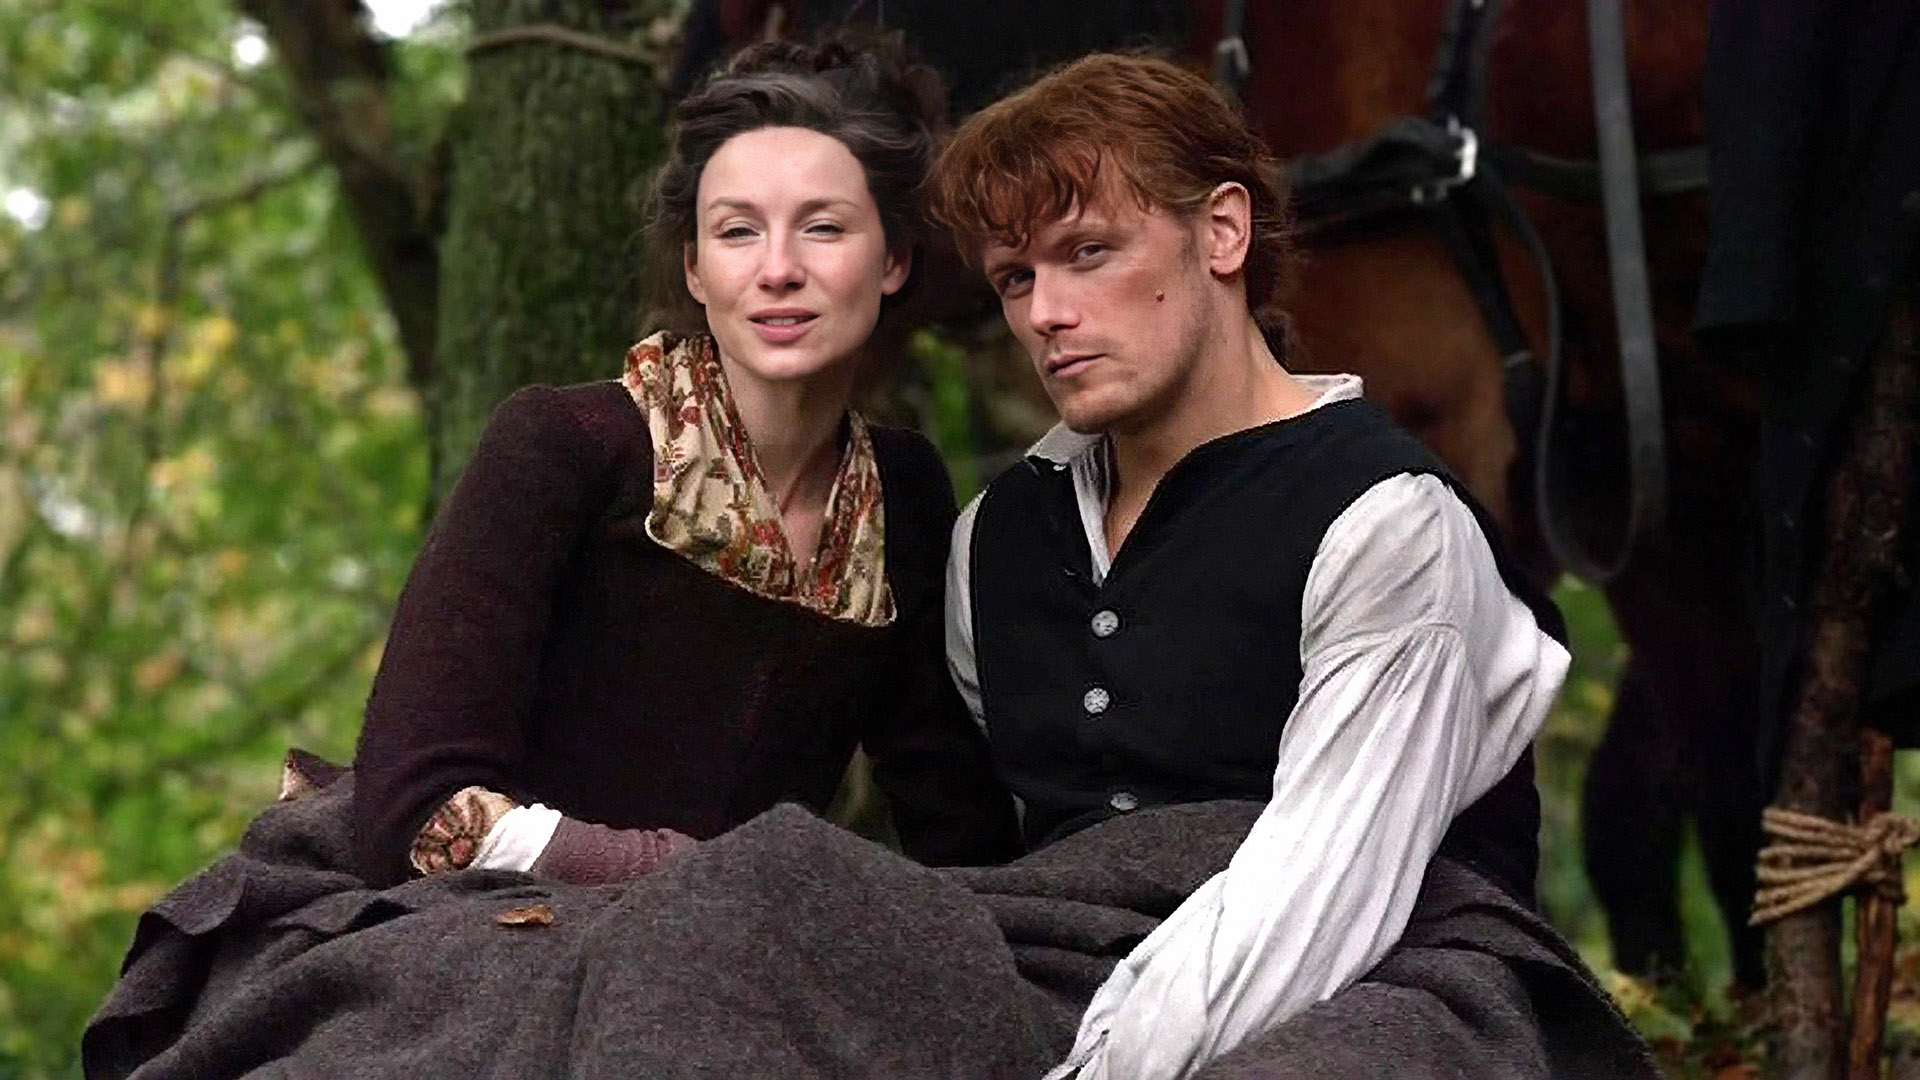 Who Are They Dating? Meet Real-Life Partners Of Outlander's Cast